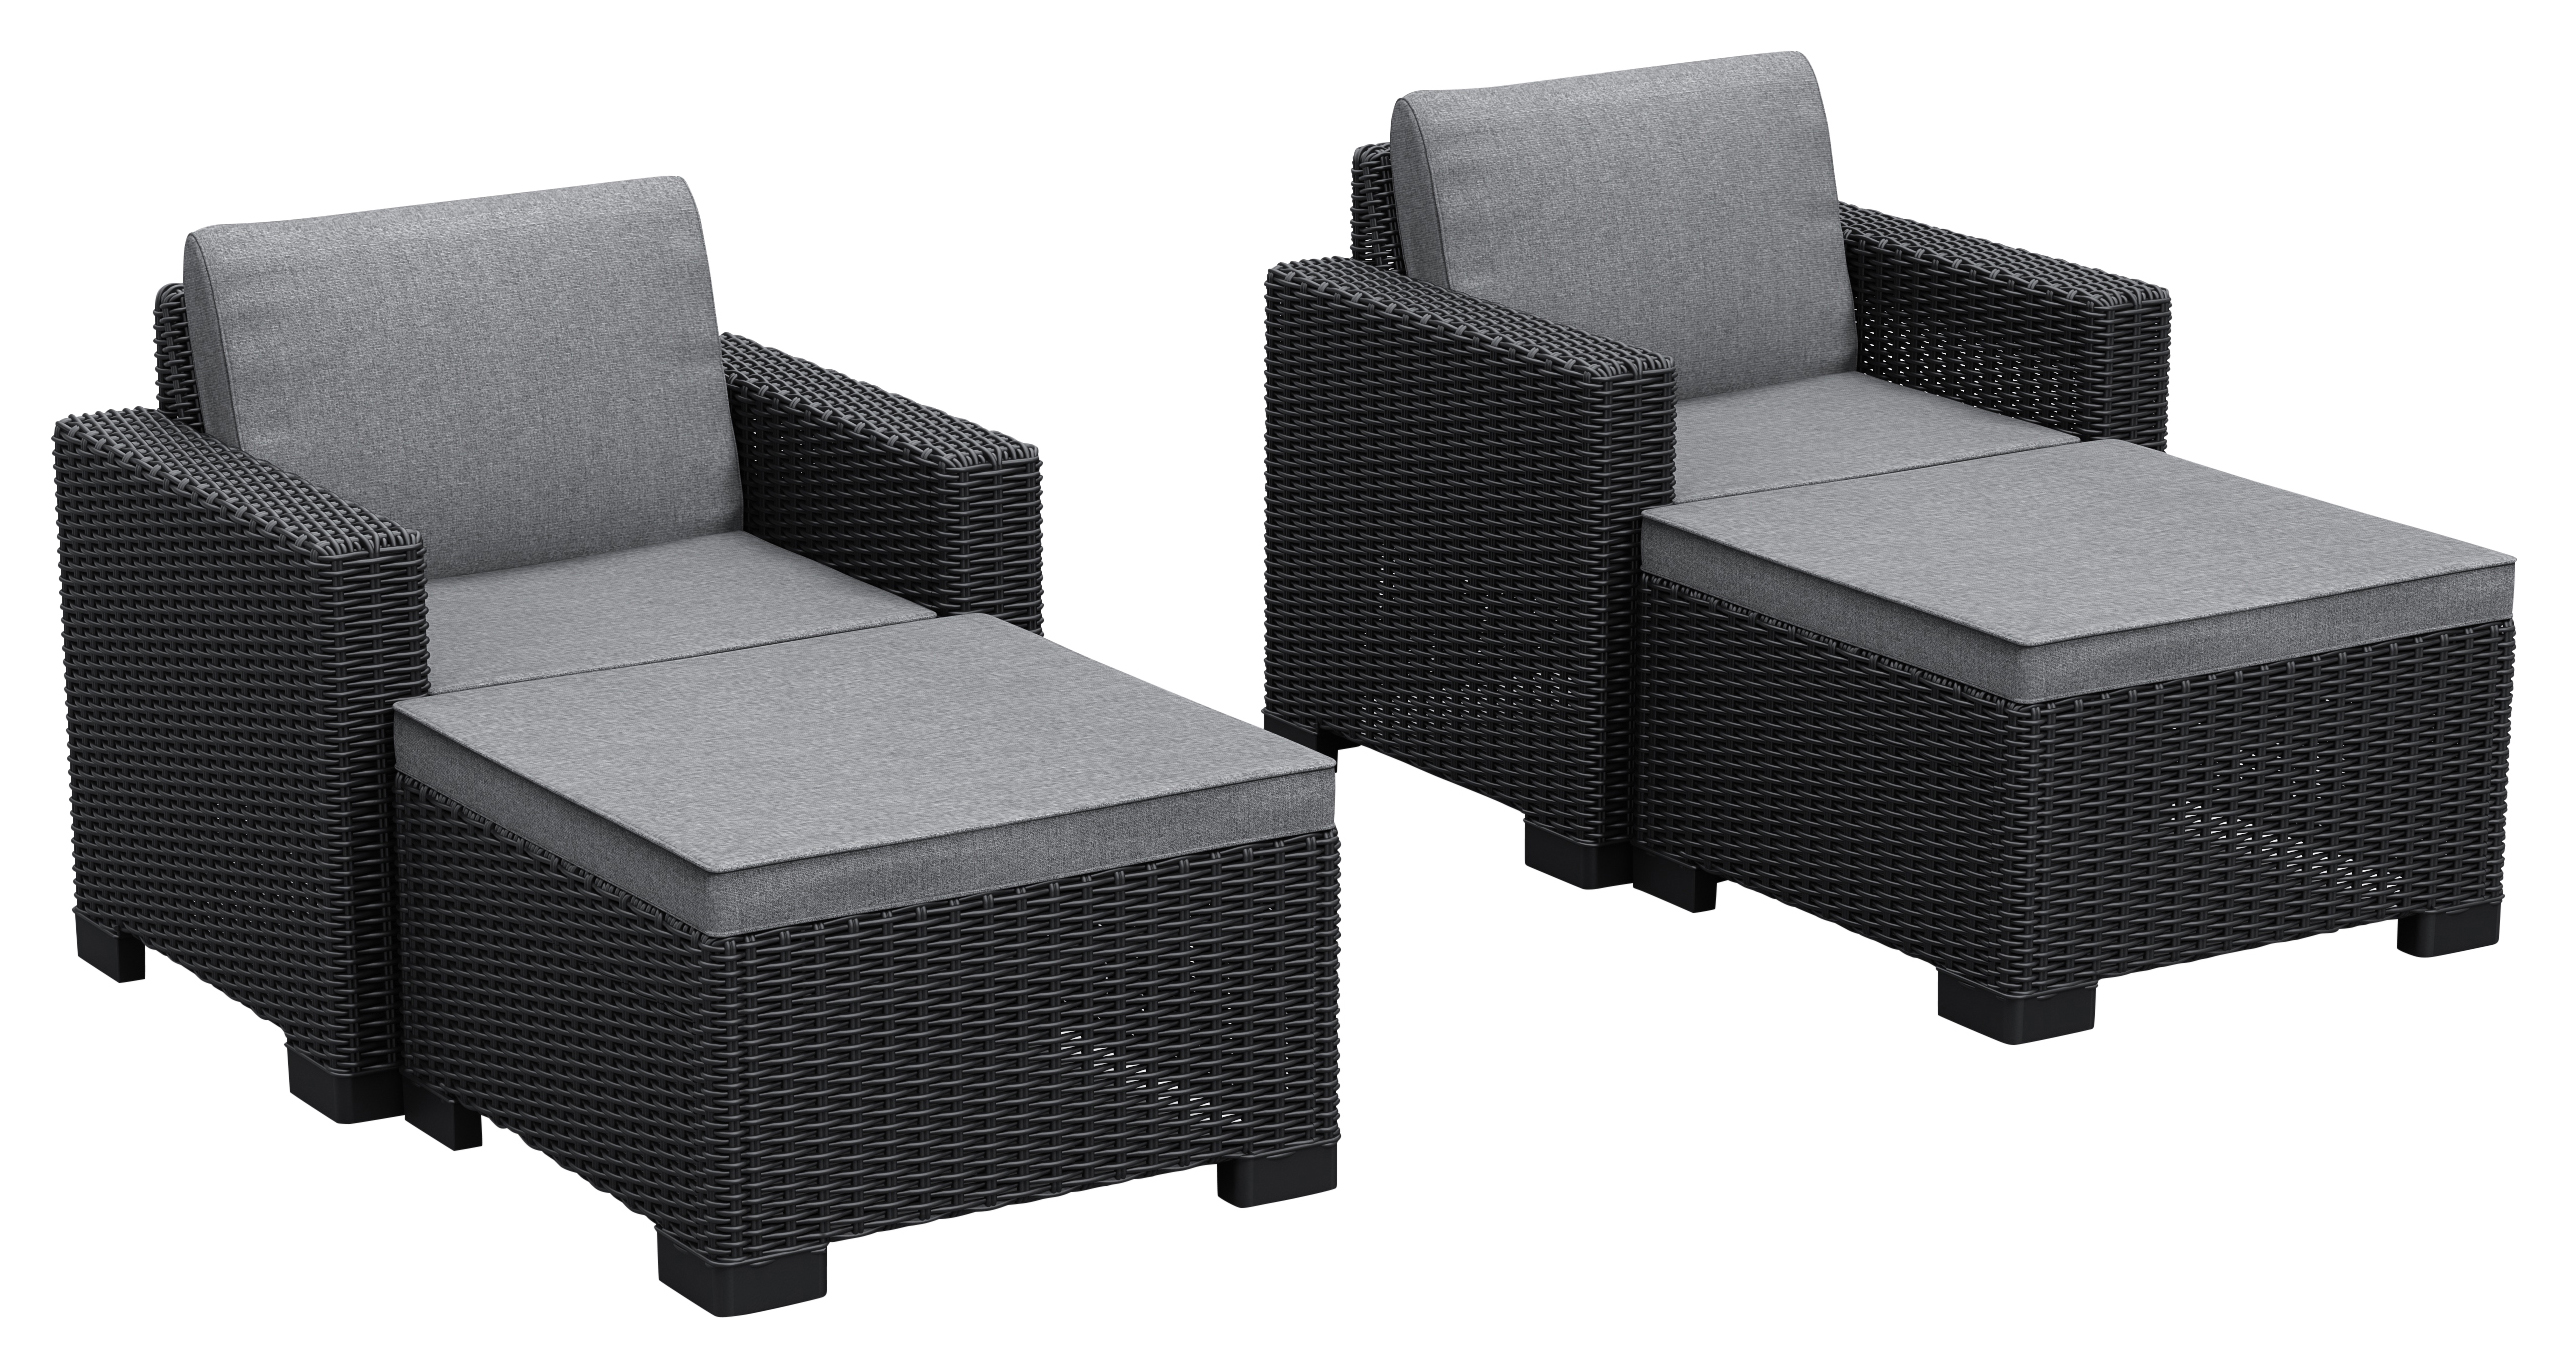 Keter California 2 Seater Outdoor Balcony Deluxe Garden Furniture Set - Graphite with Grey Cushions